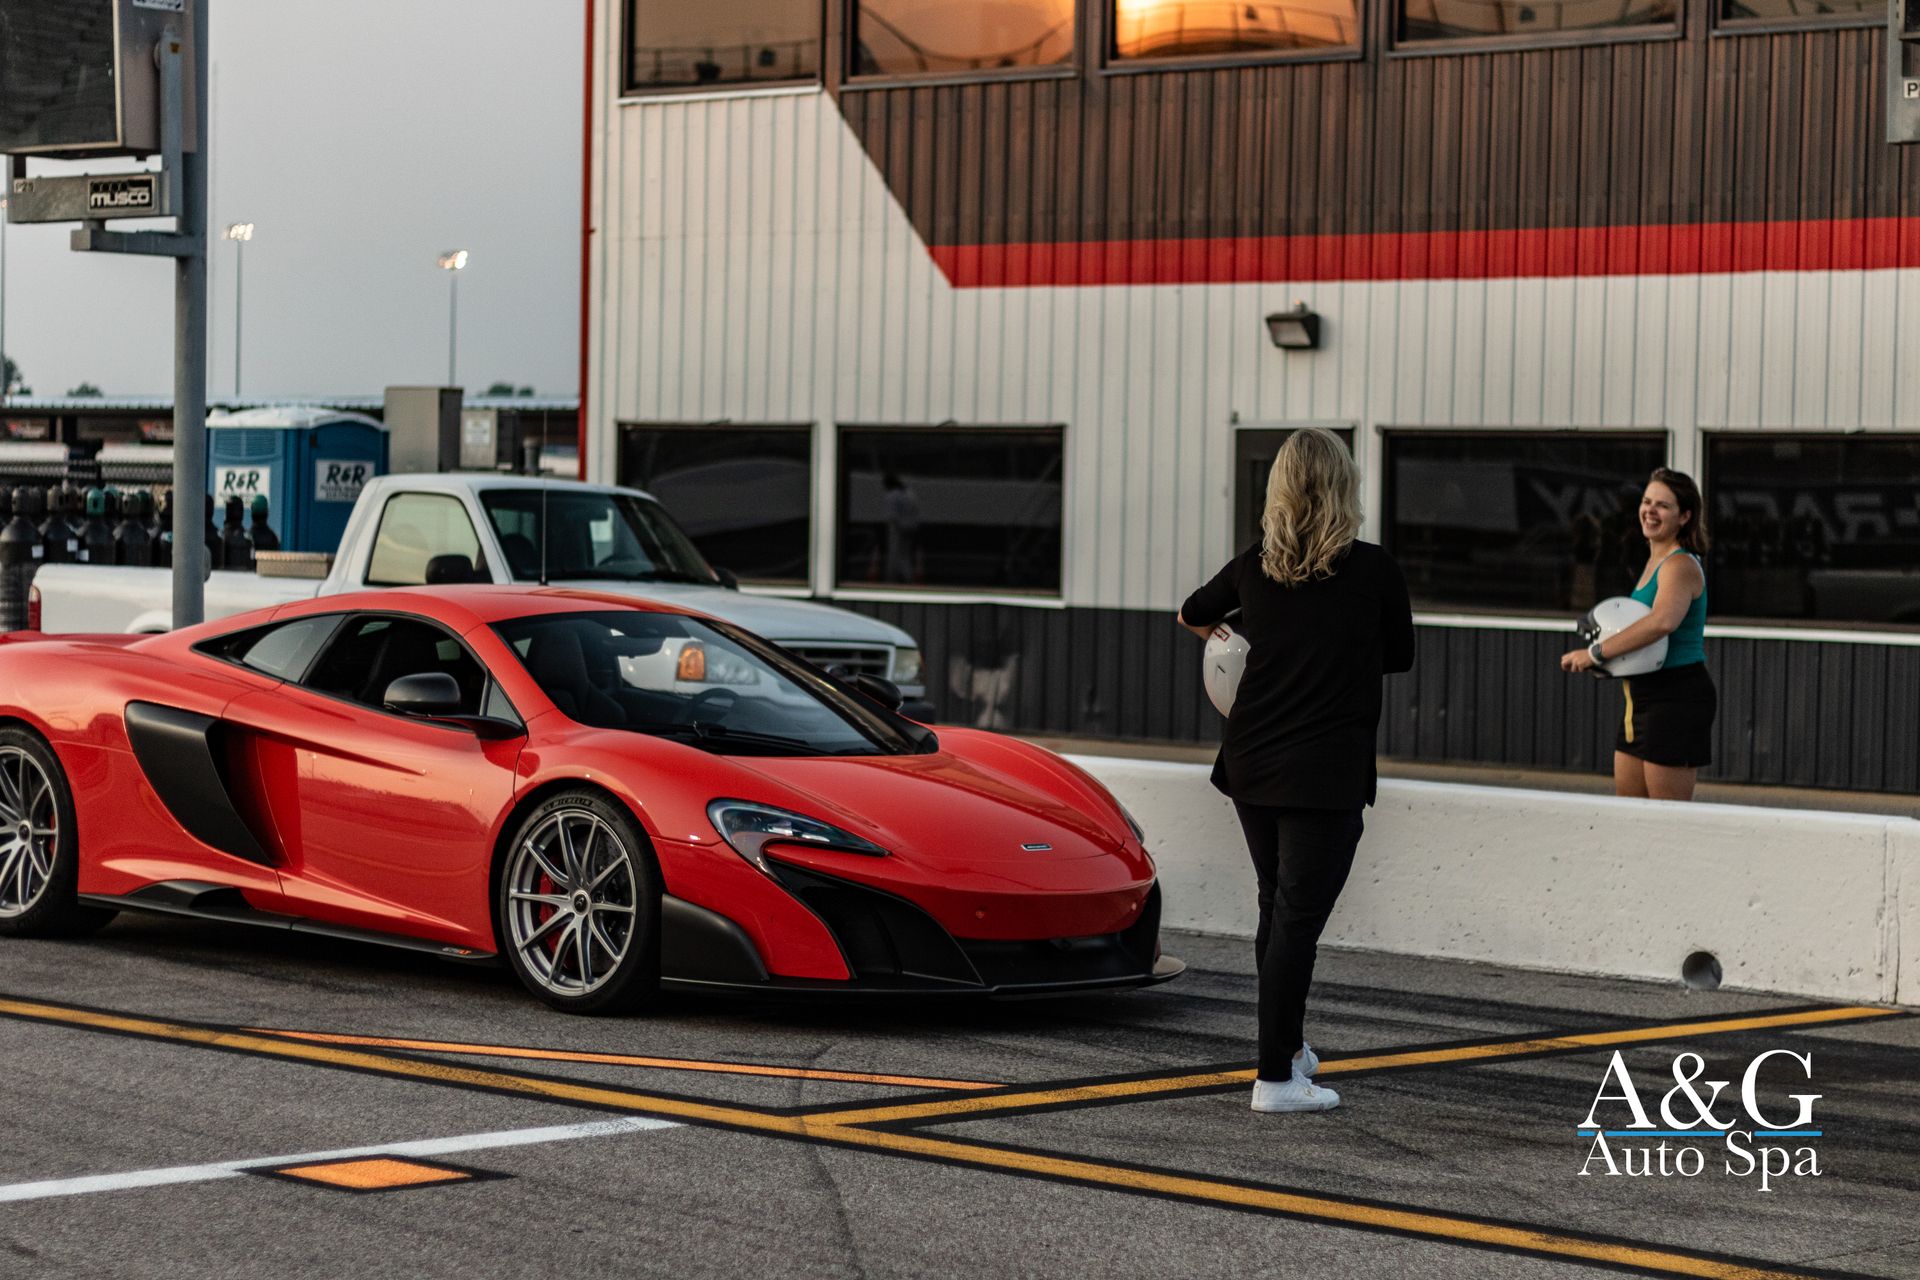 Track day with mclaren 675lt and two girls